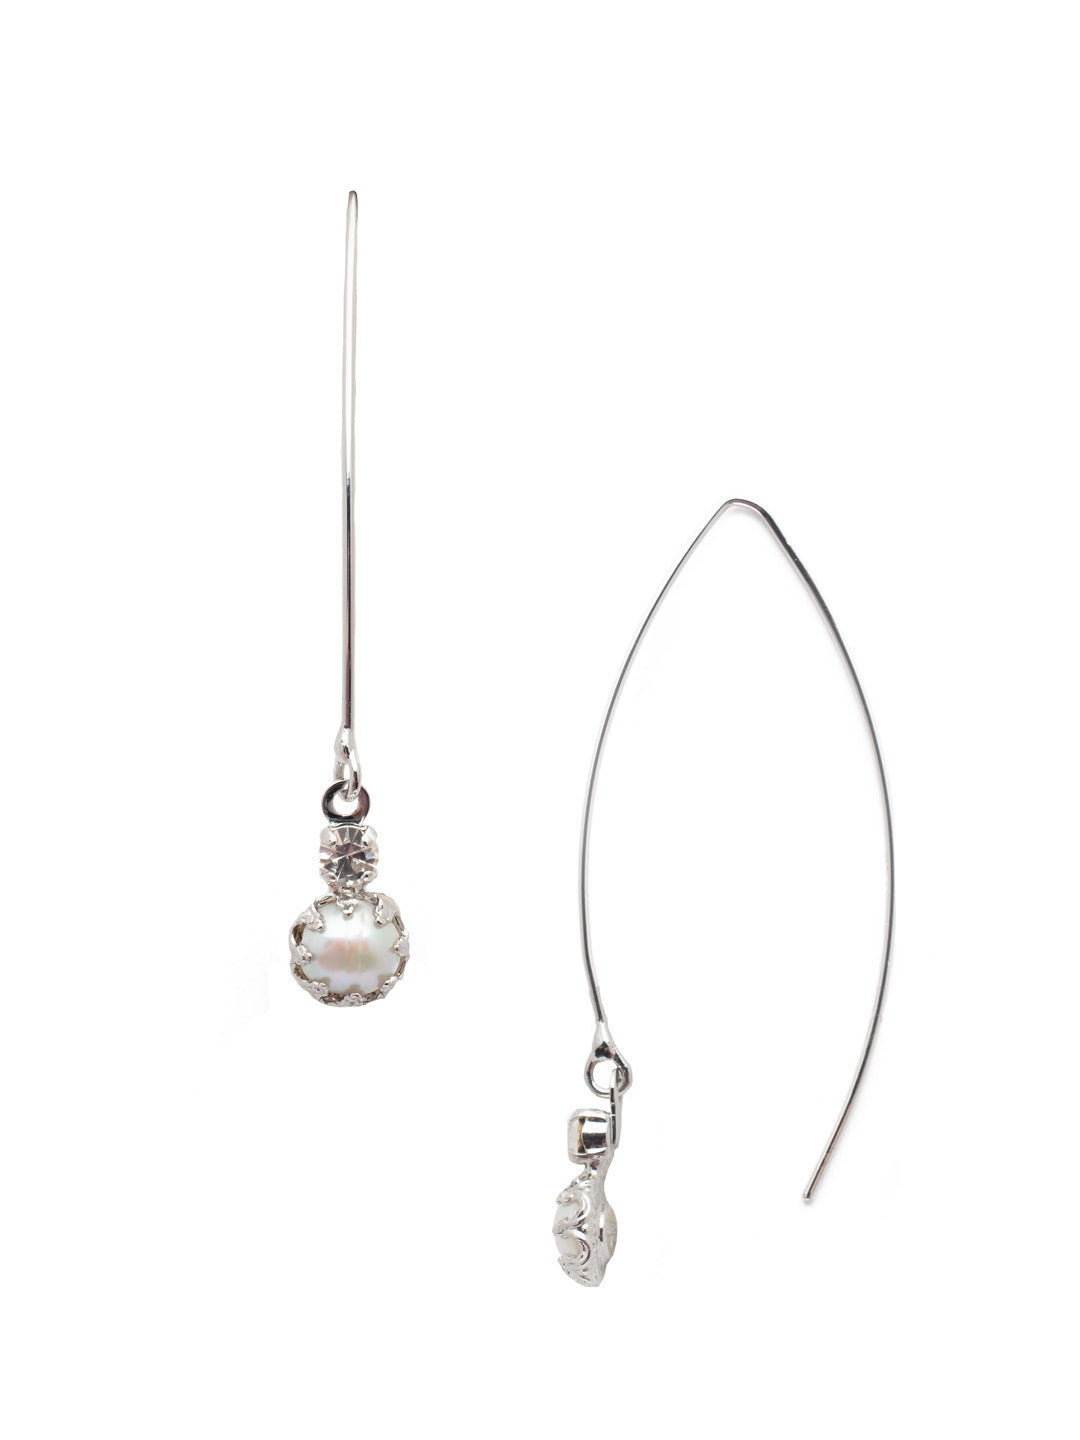 Kit Dangle Earring - EEV106PDCRY - <p>The Kit Dangle Earrings feature a single freshwater pearl nestled beneath a sparkling crystal. The dainty design makes it perfect for everyday wear! From Sorrelli's Crystal collection in our Palladium finish.</p>